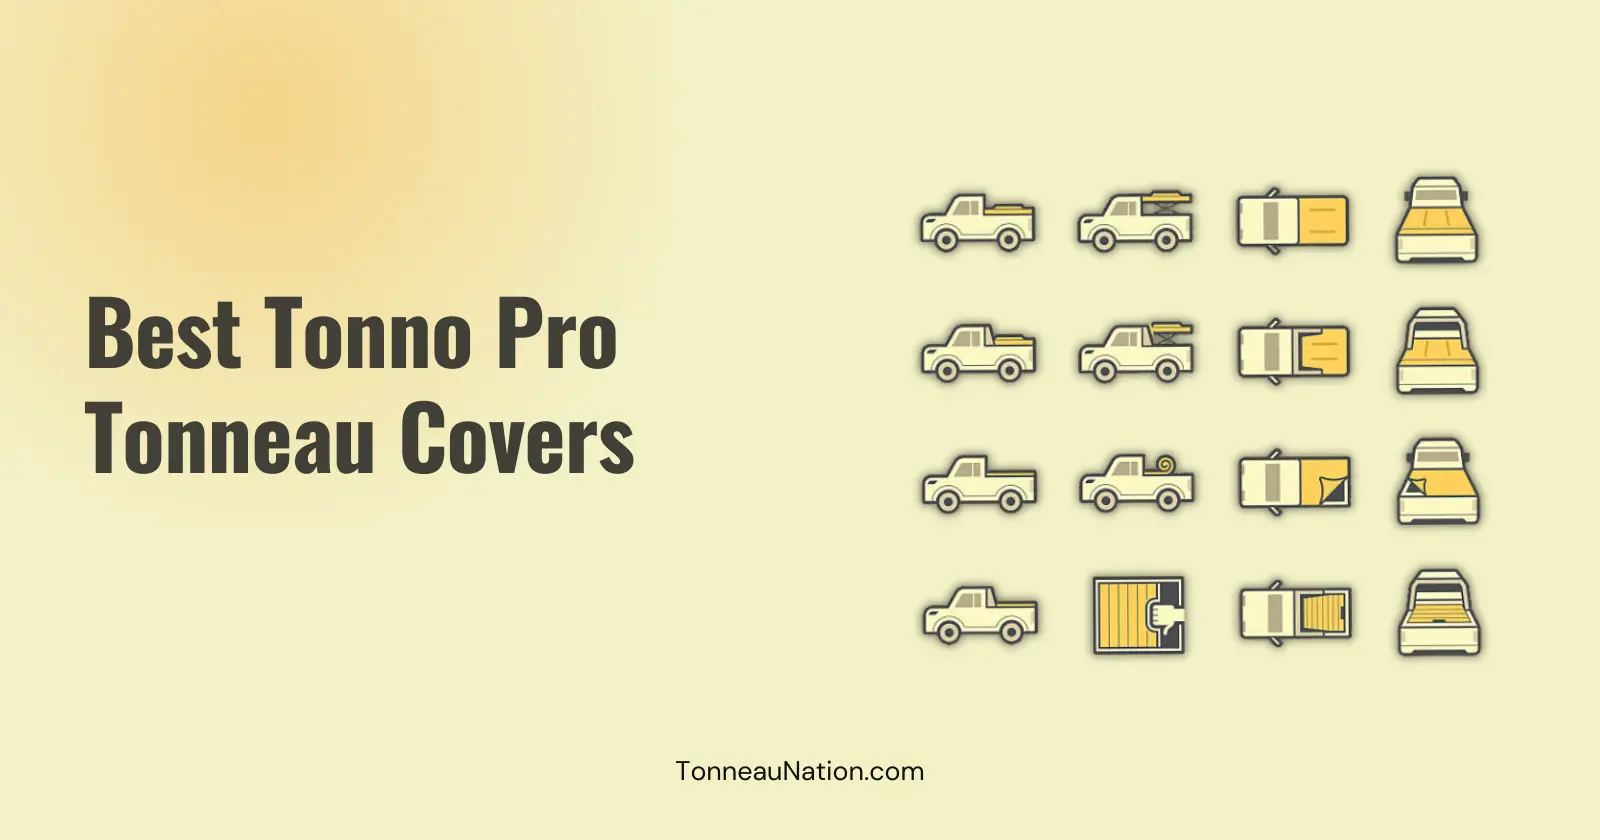 Tonneau cover from Tonno Pro brand